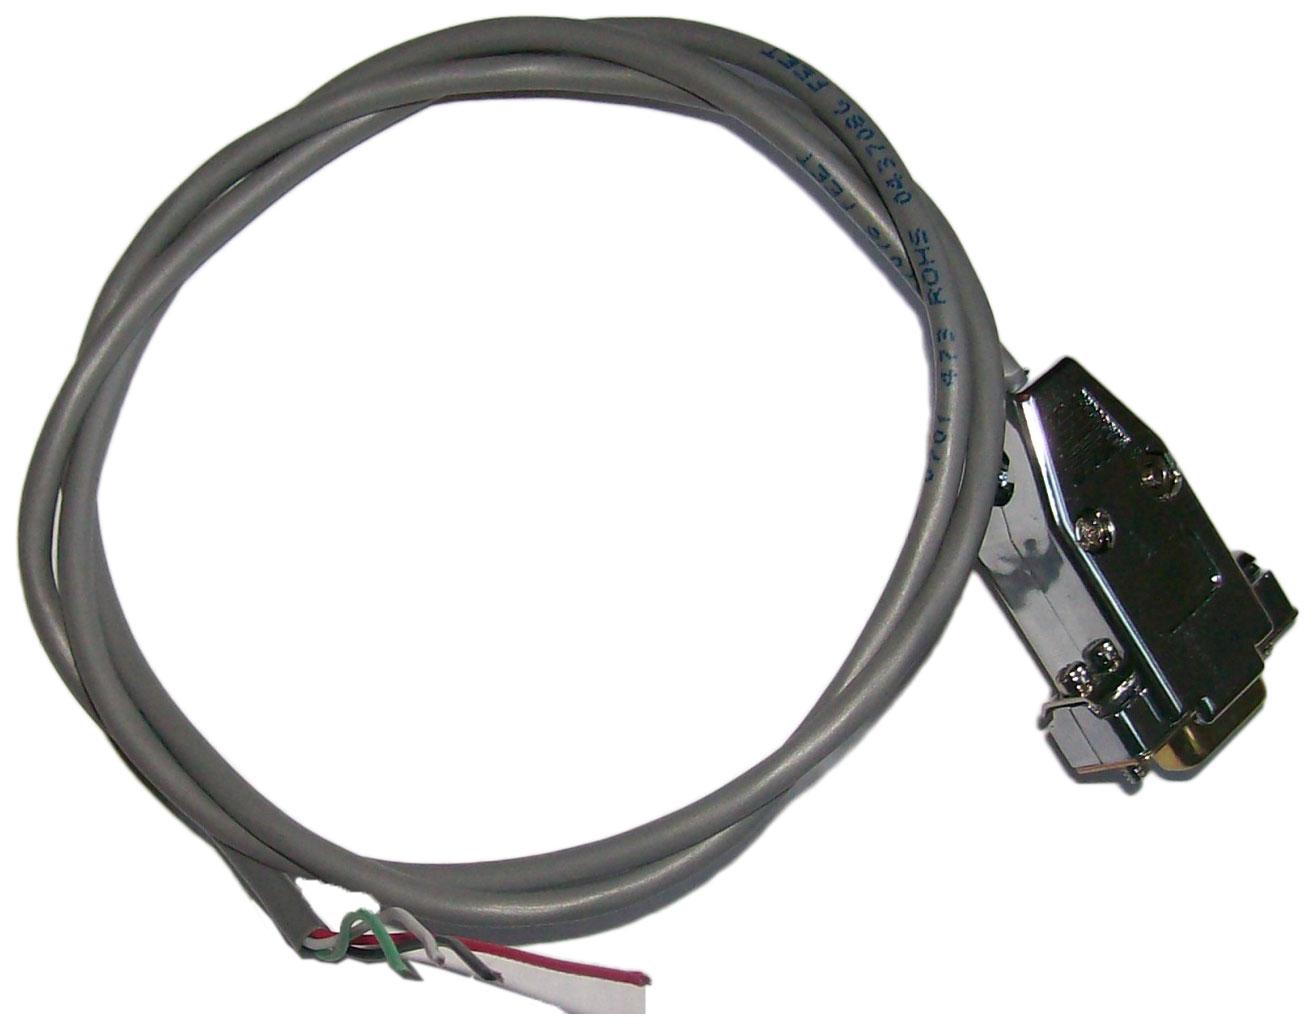 CAN cable for DB9 Male Connector